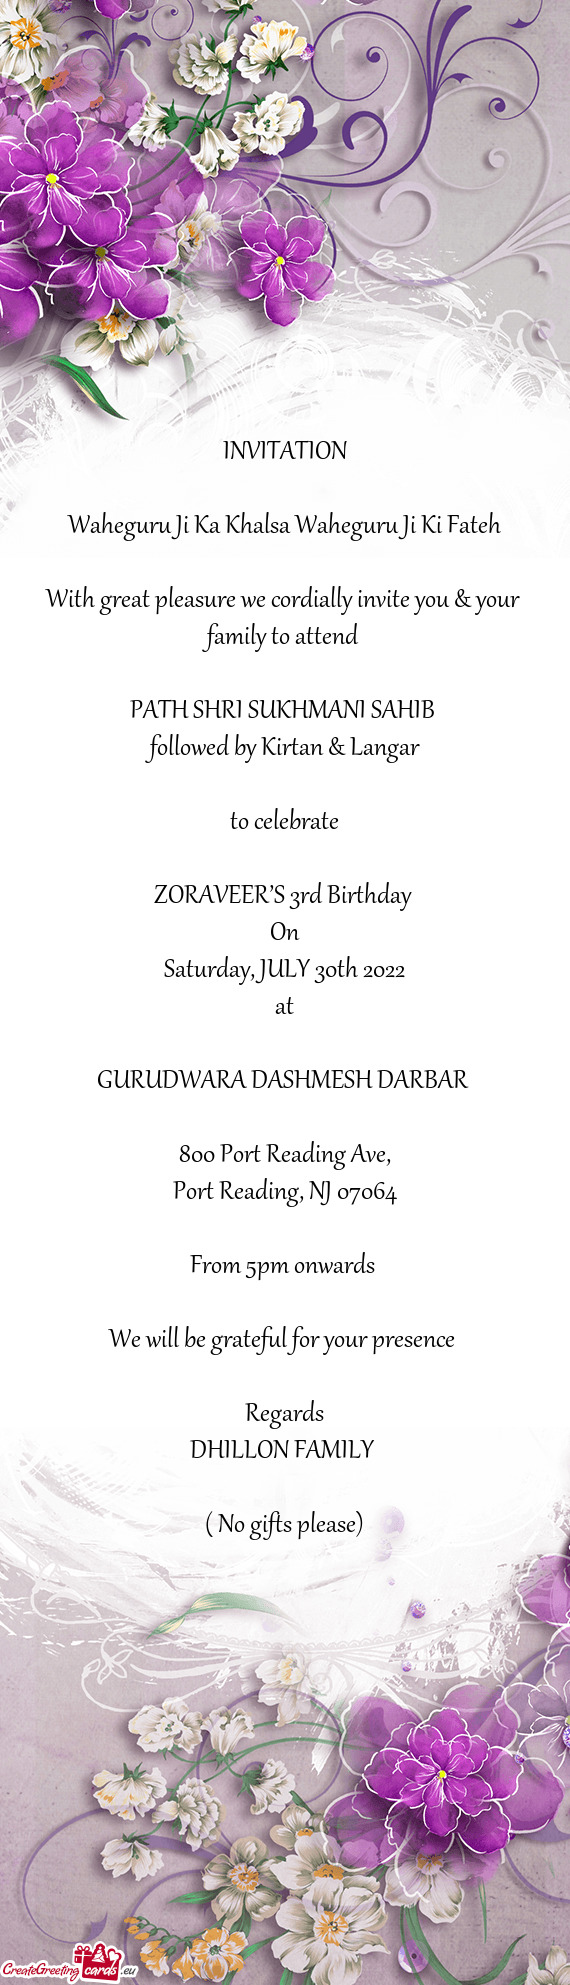 With great pleasure we cordially invite you & your